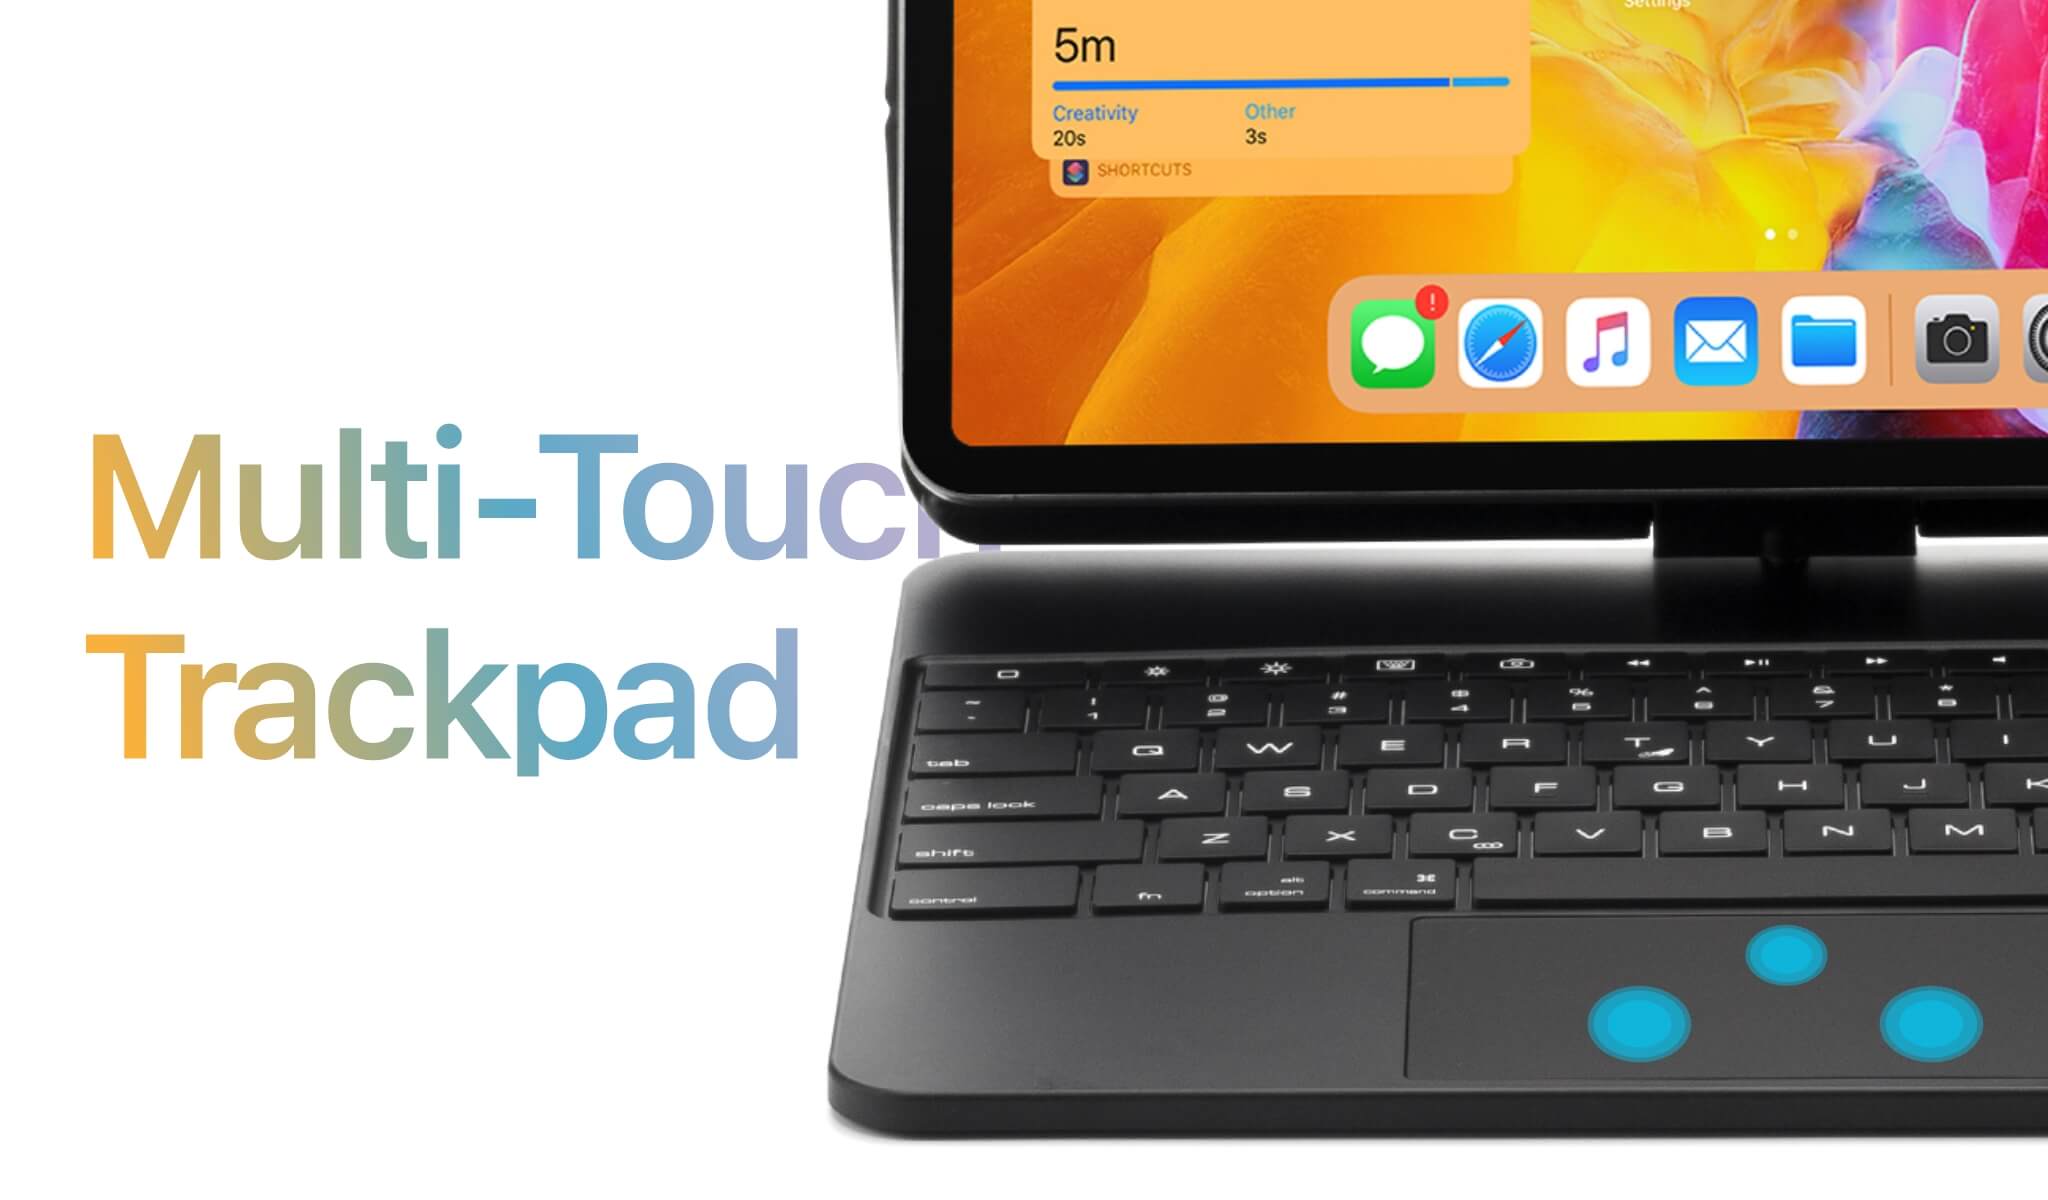 Swift Magnetic Keyboard Multi-touch Trackpad